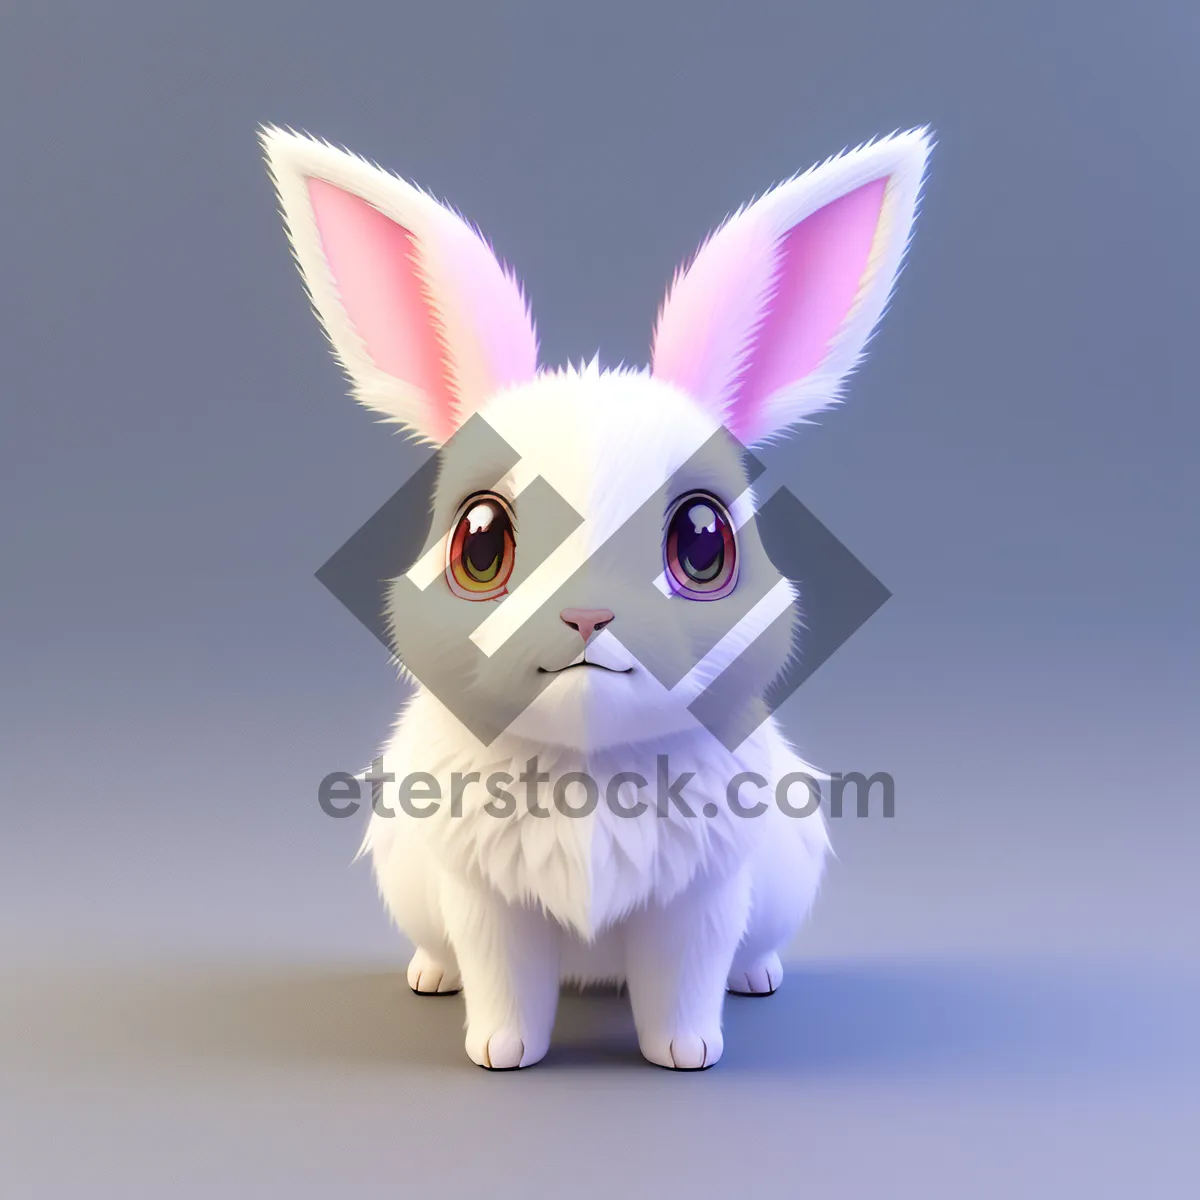 Picture of Cute Bunny with Fluffy Fur and Adorable Ears